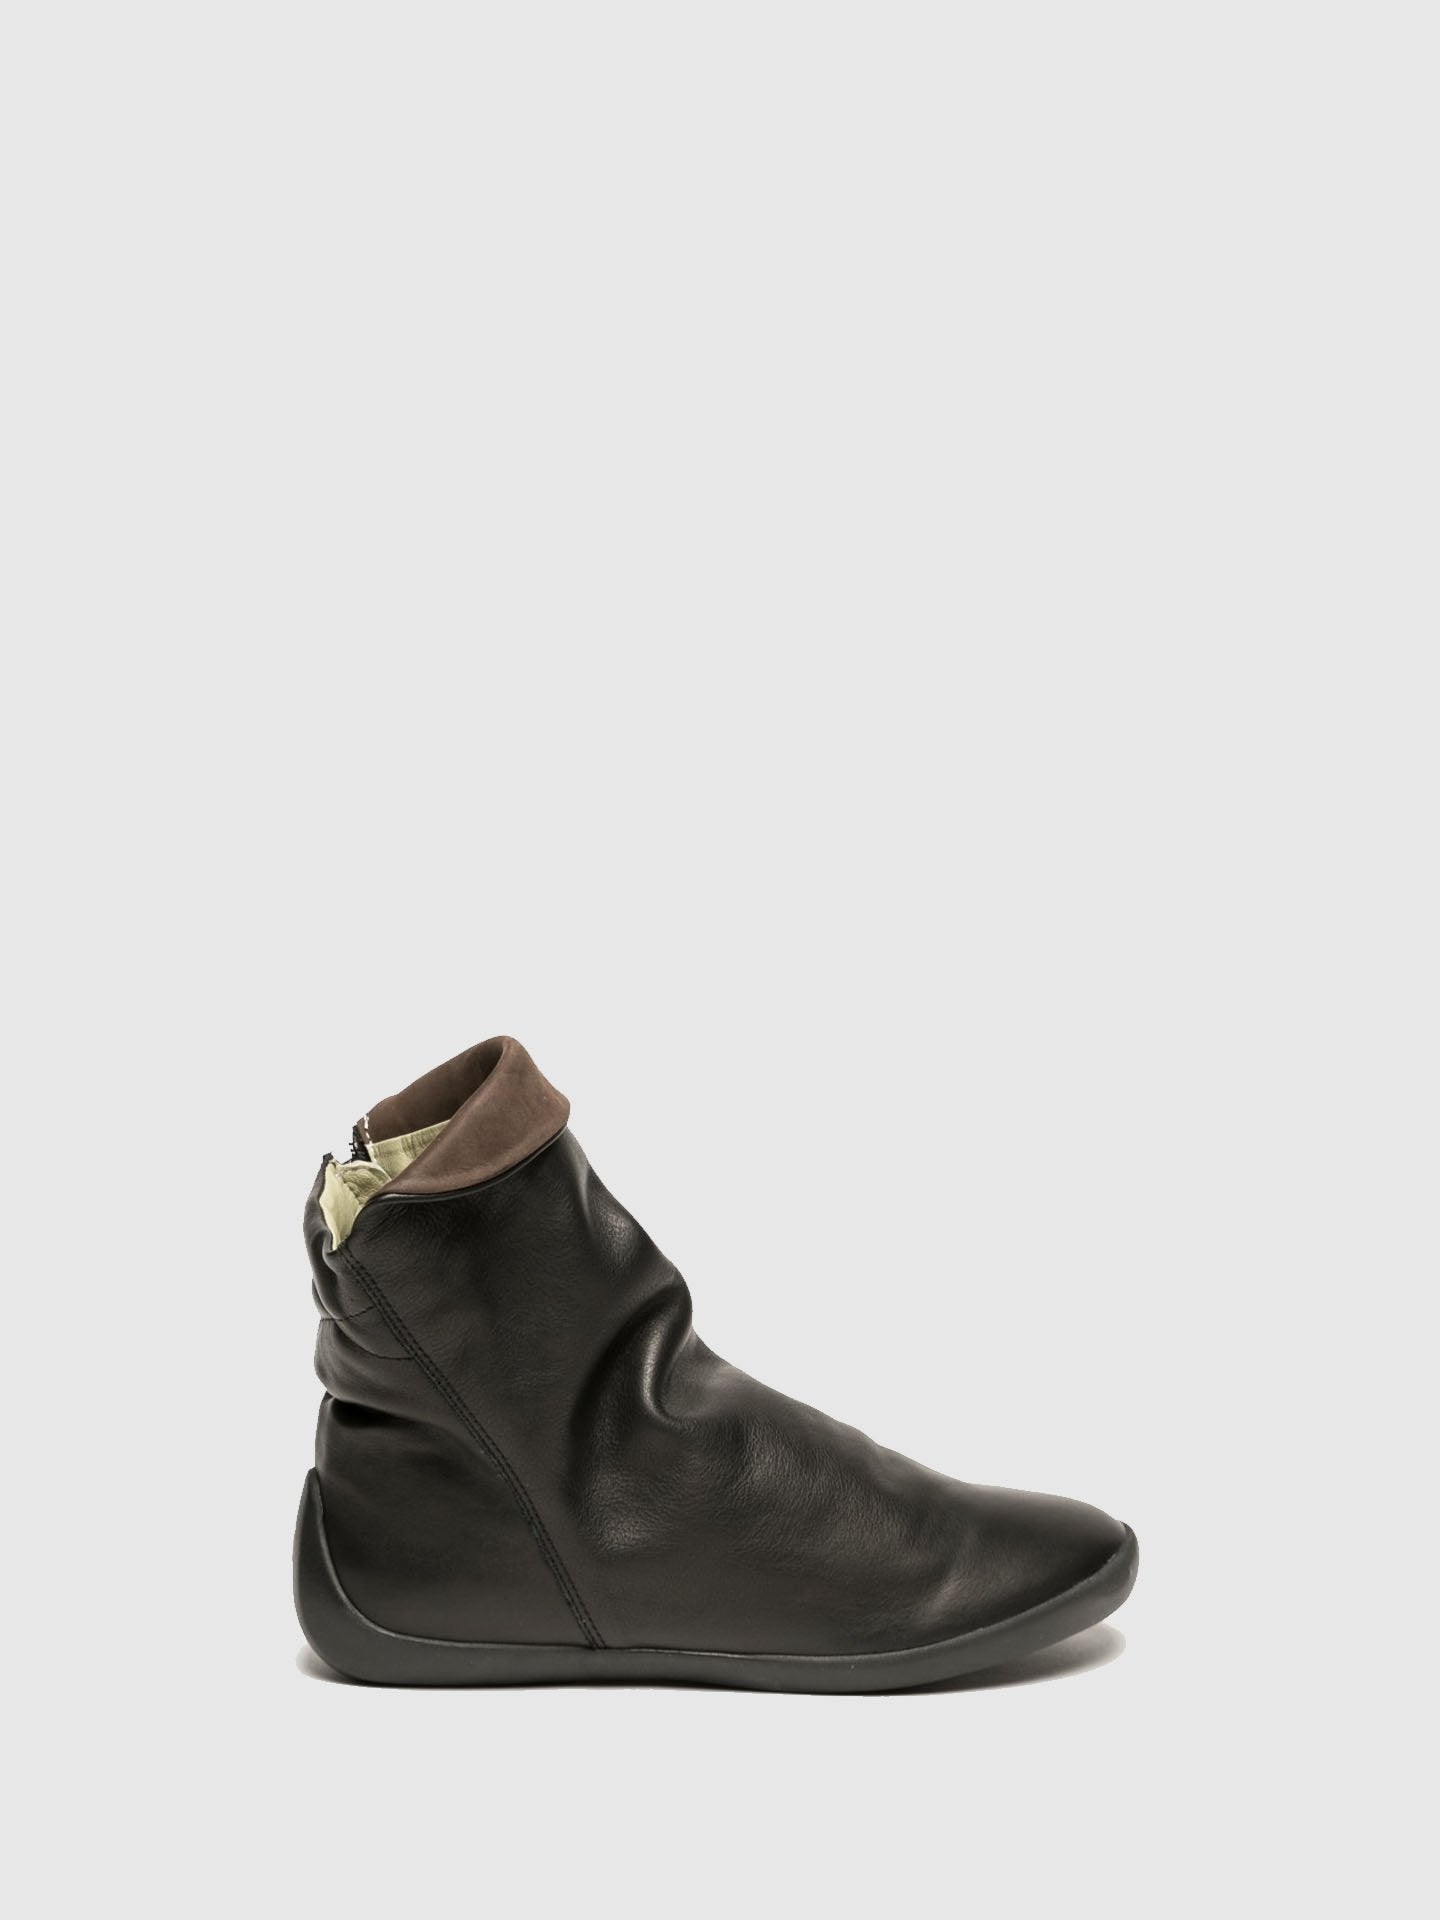 Softinos Coal Black Zip Up Ankle Boots